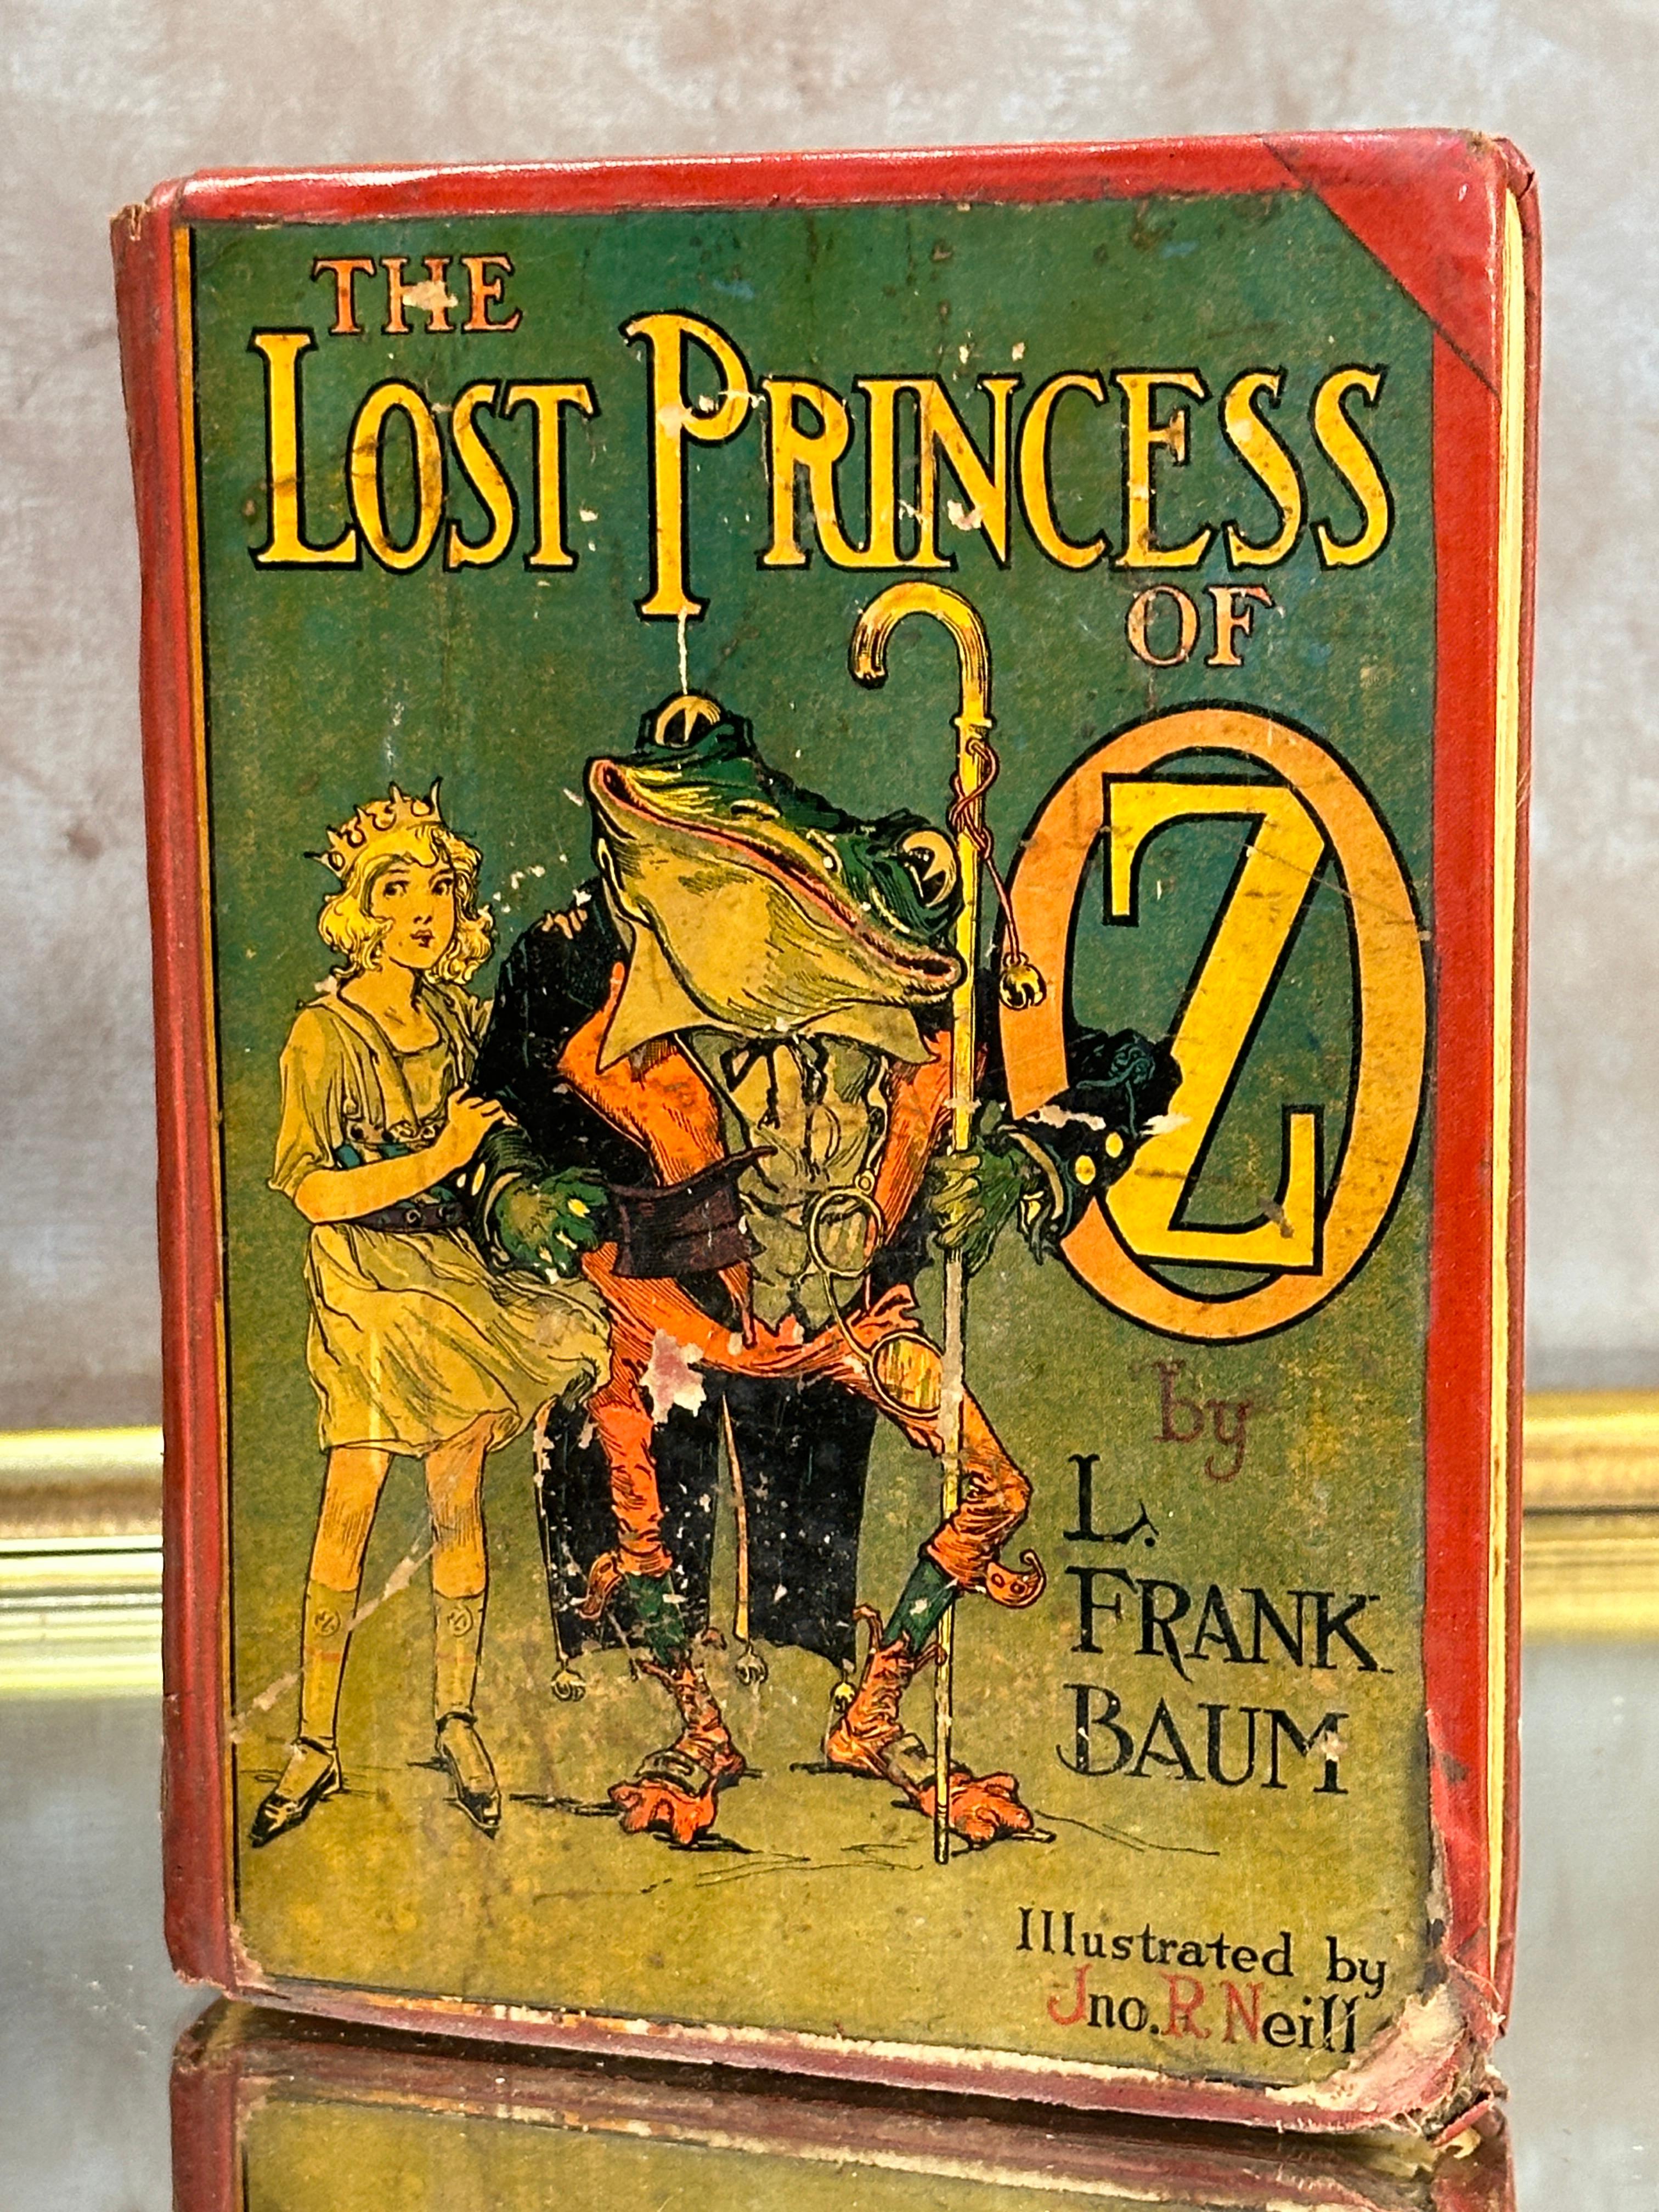 The Lost Princess of OZ and The Magic of Oz